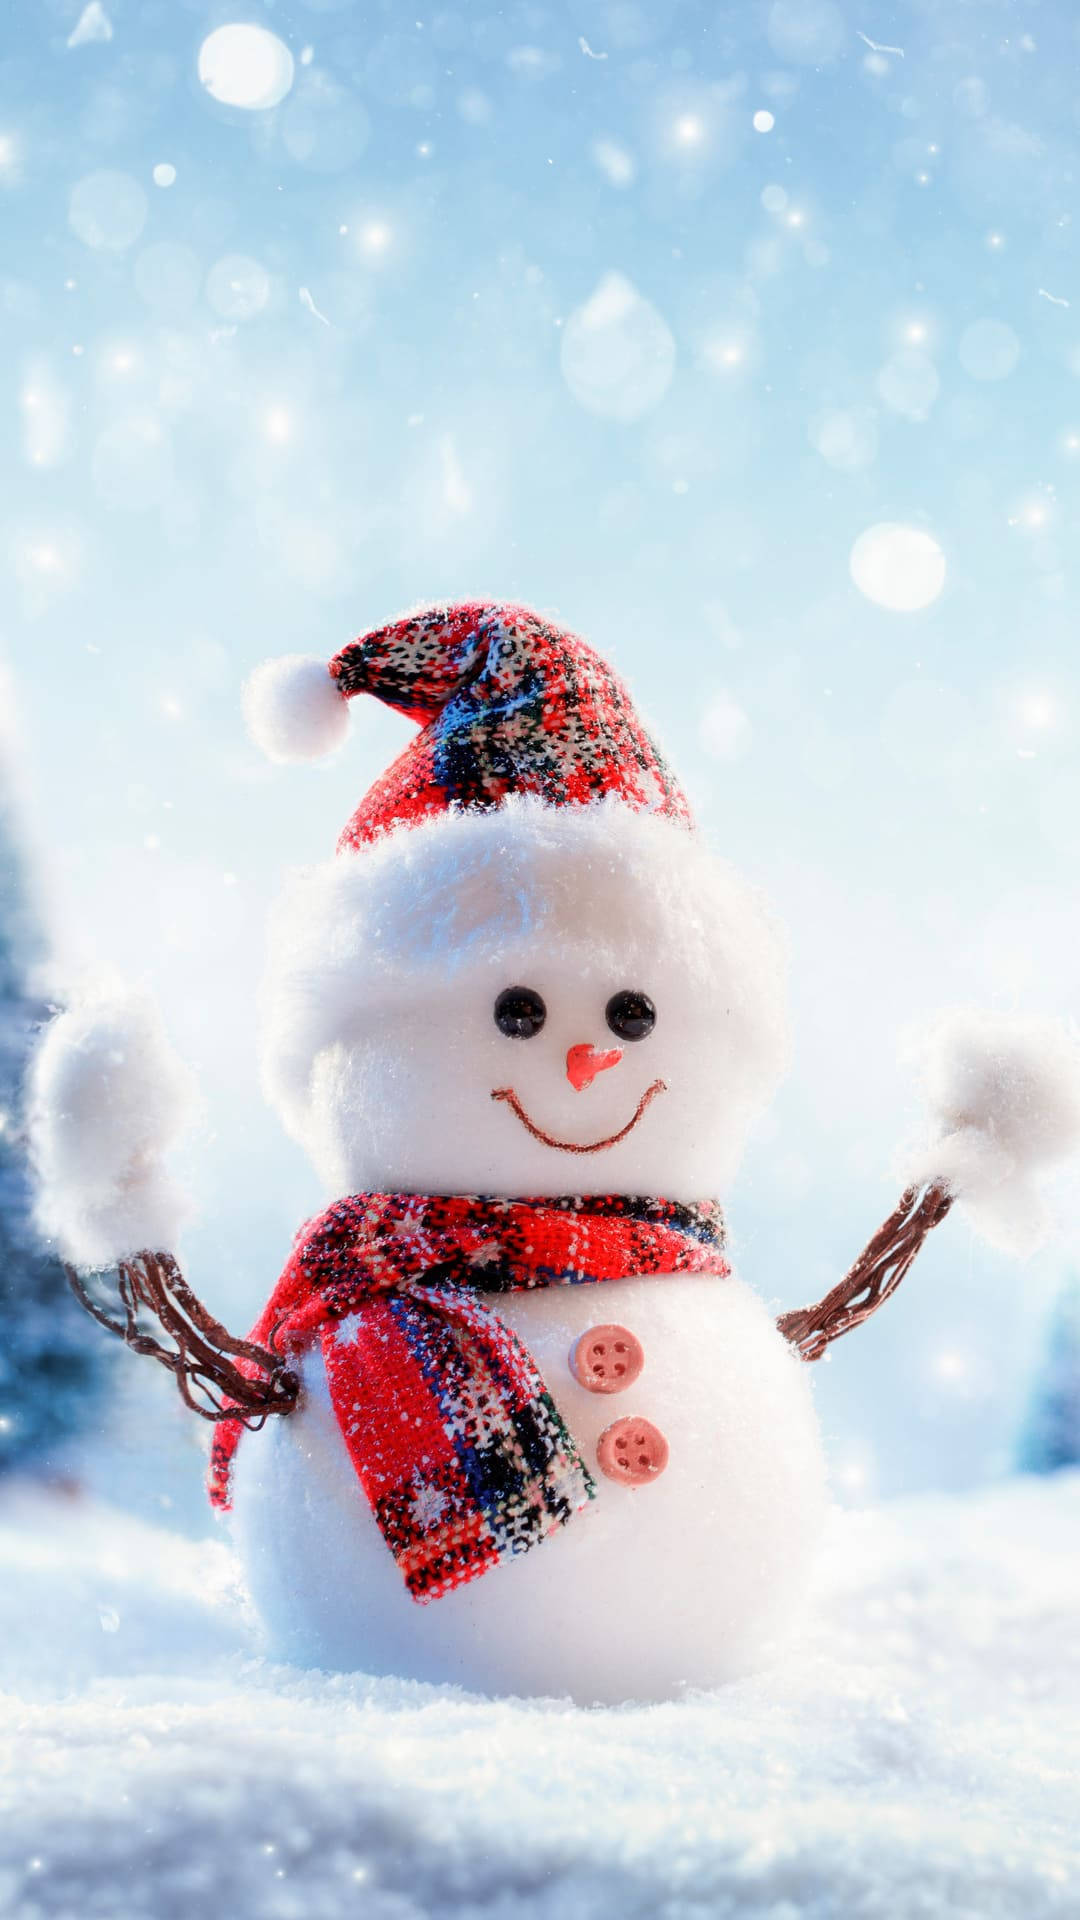 "Stay cozy and warm this winter with this cute iPhone wallpaper!" Wallpaper